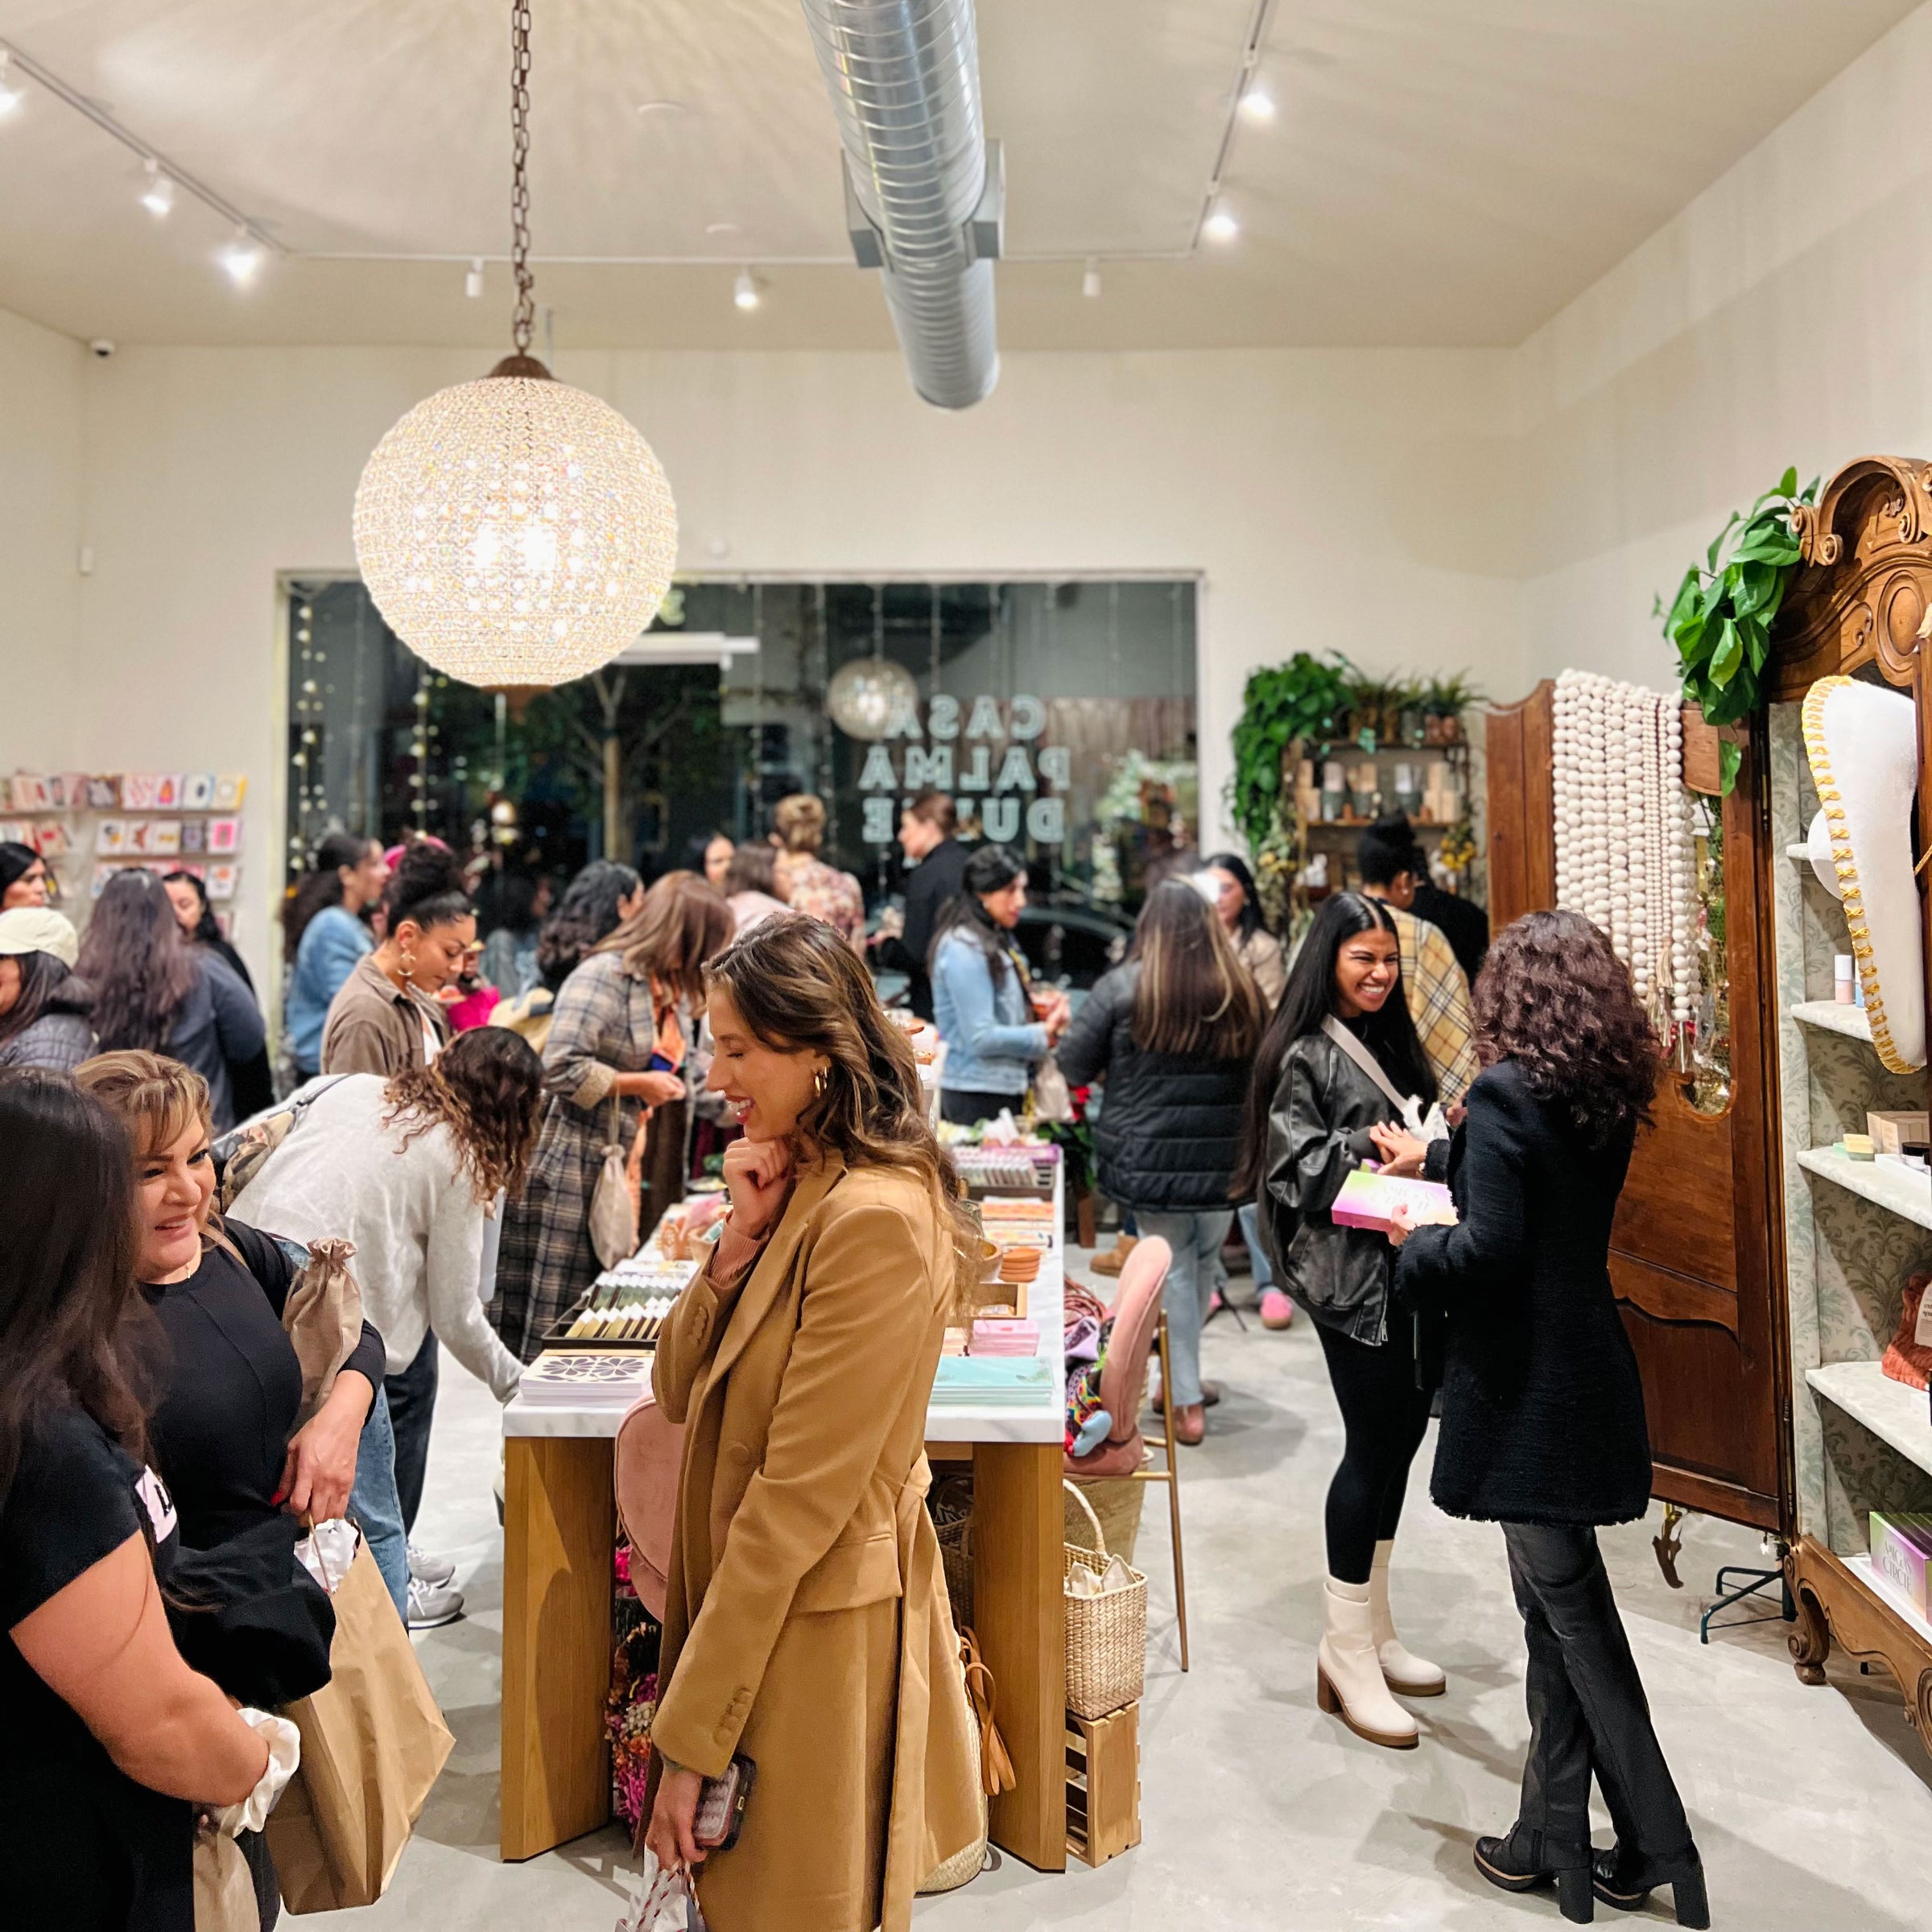 Photo of product release party inside of Casa Palma Dulce